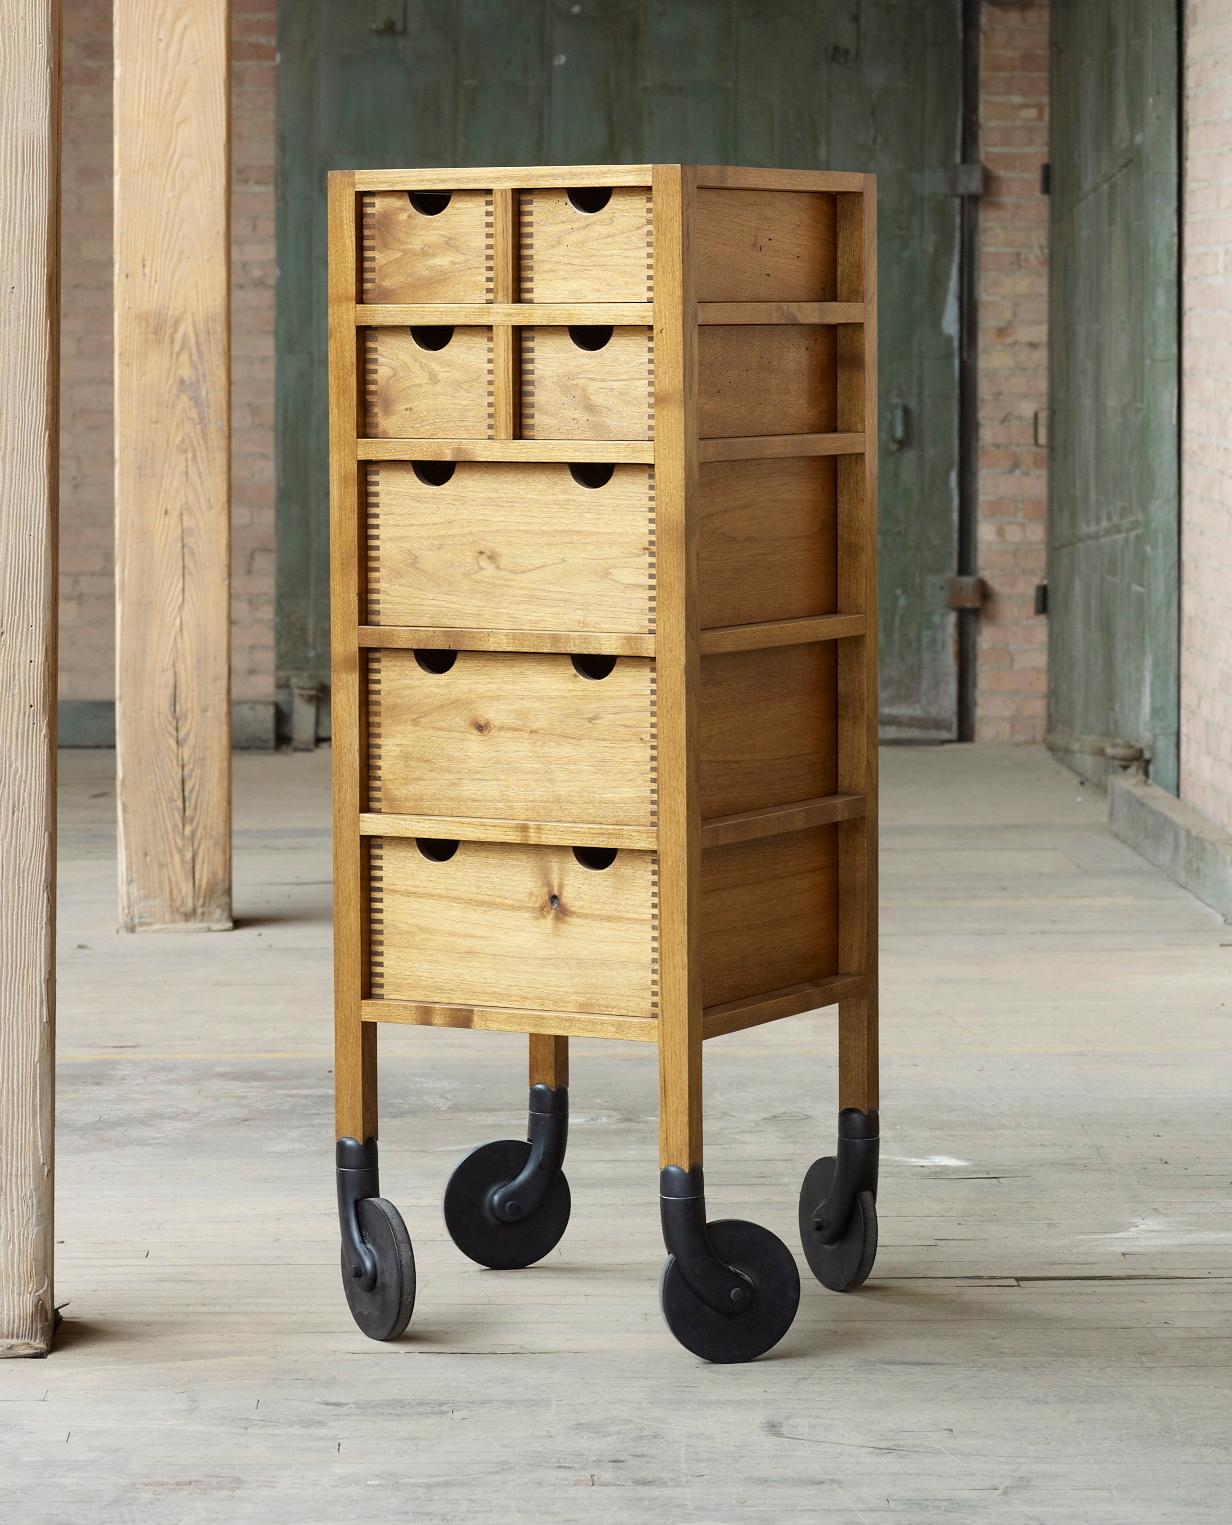 Built entirely of solid wood, the Shaker-influenced Rolling Dresser features open-frame construction and hand-carved, swiveling solid wood casters. Made to order at our Chicago studio and available in a range of species and finishes. 

Founded in